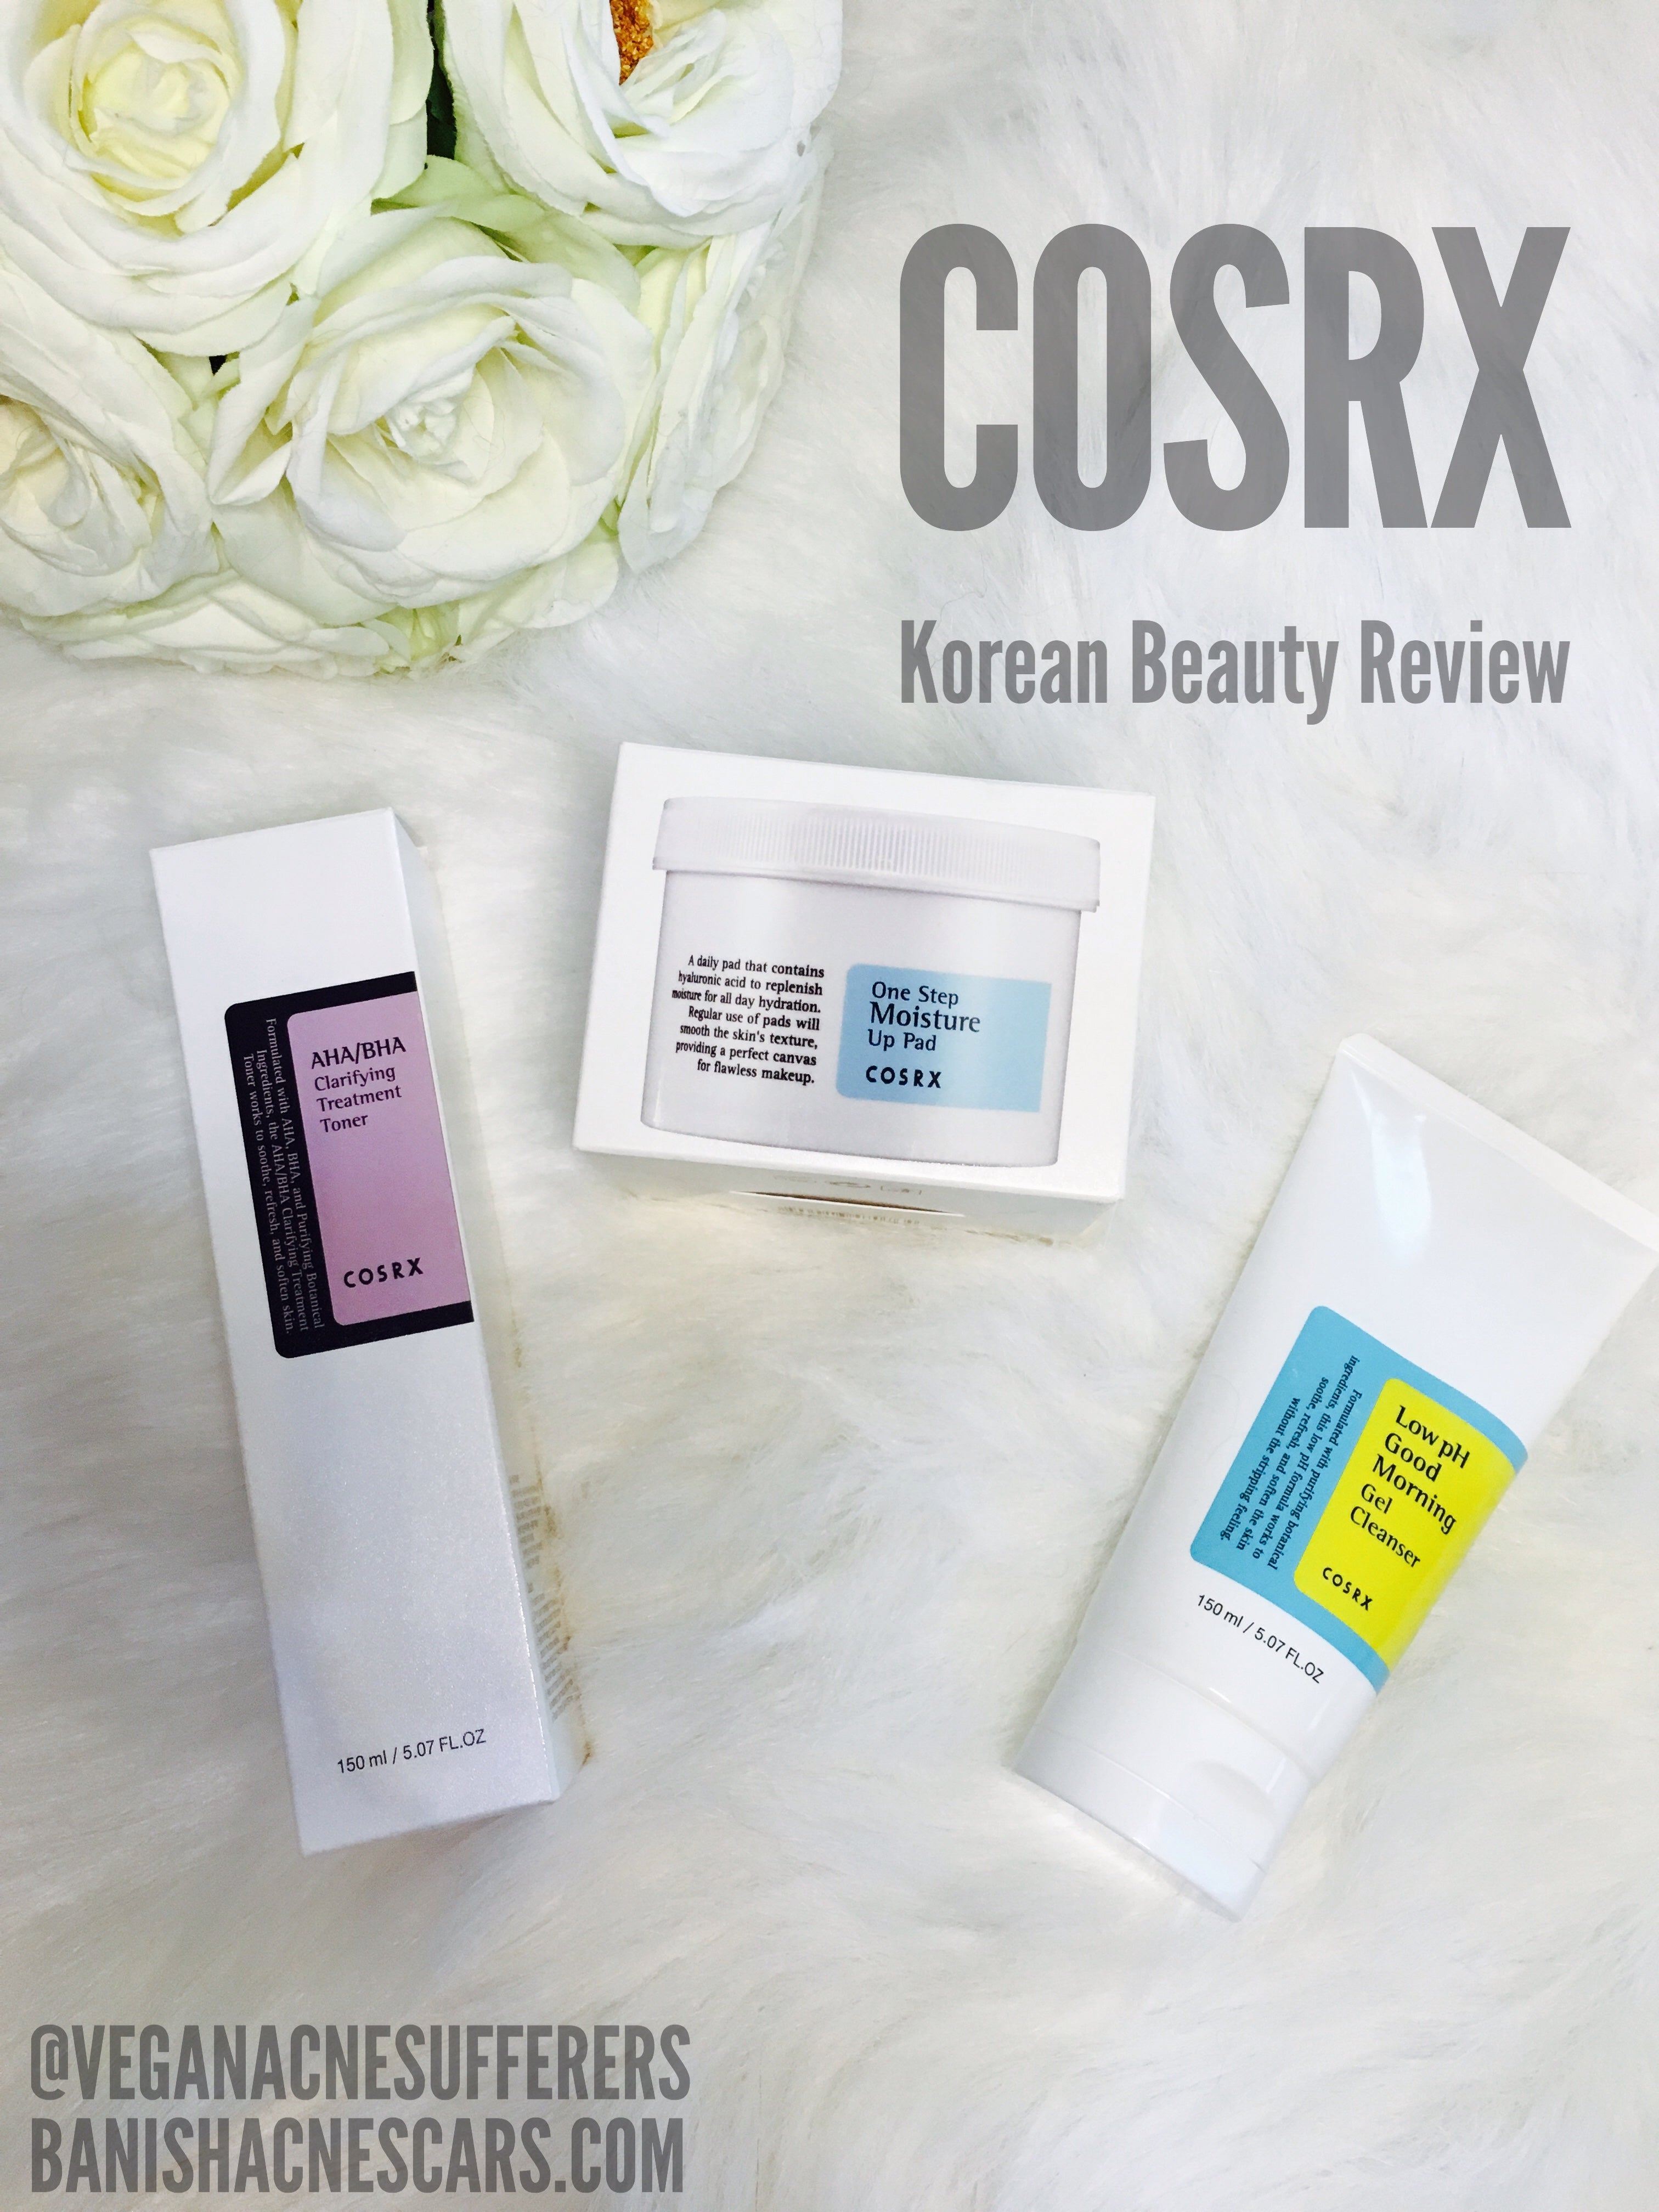 COSRX Review: You'll Love This Amazing & Cheap Korean Skincare Line